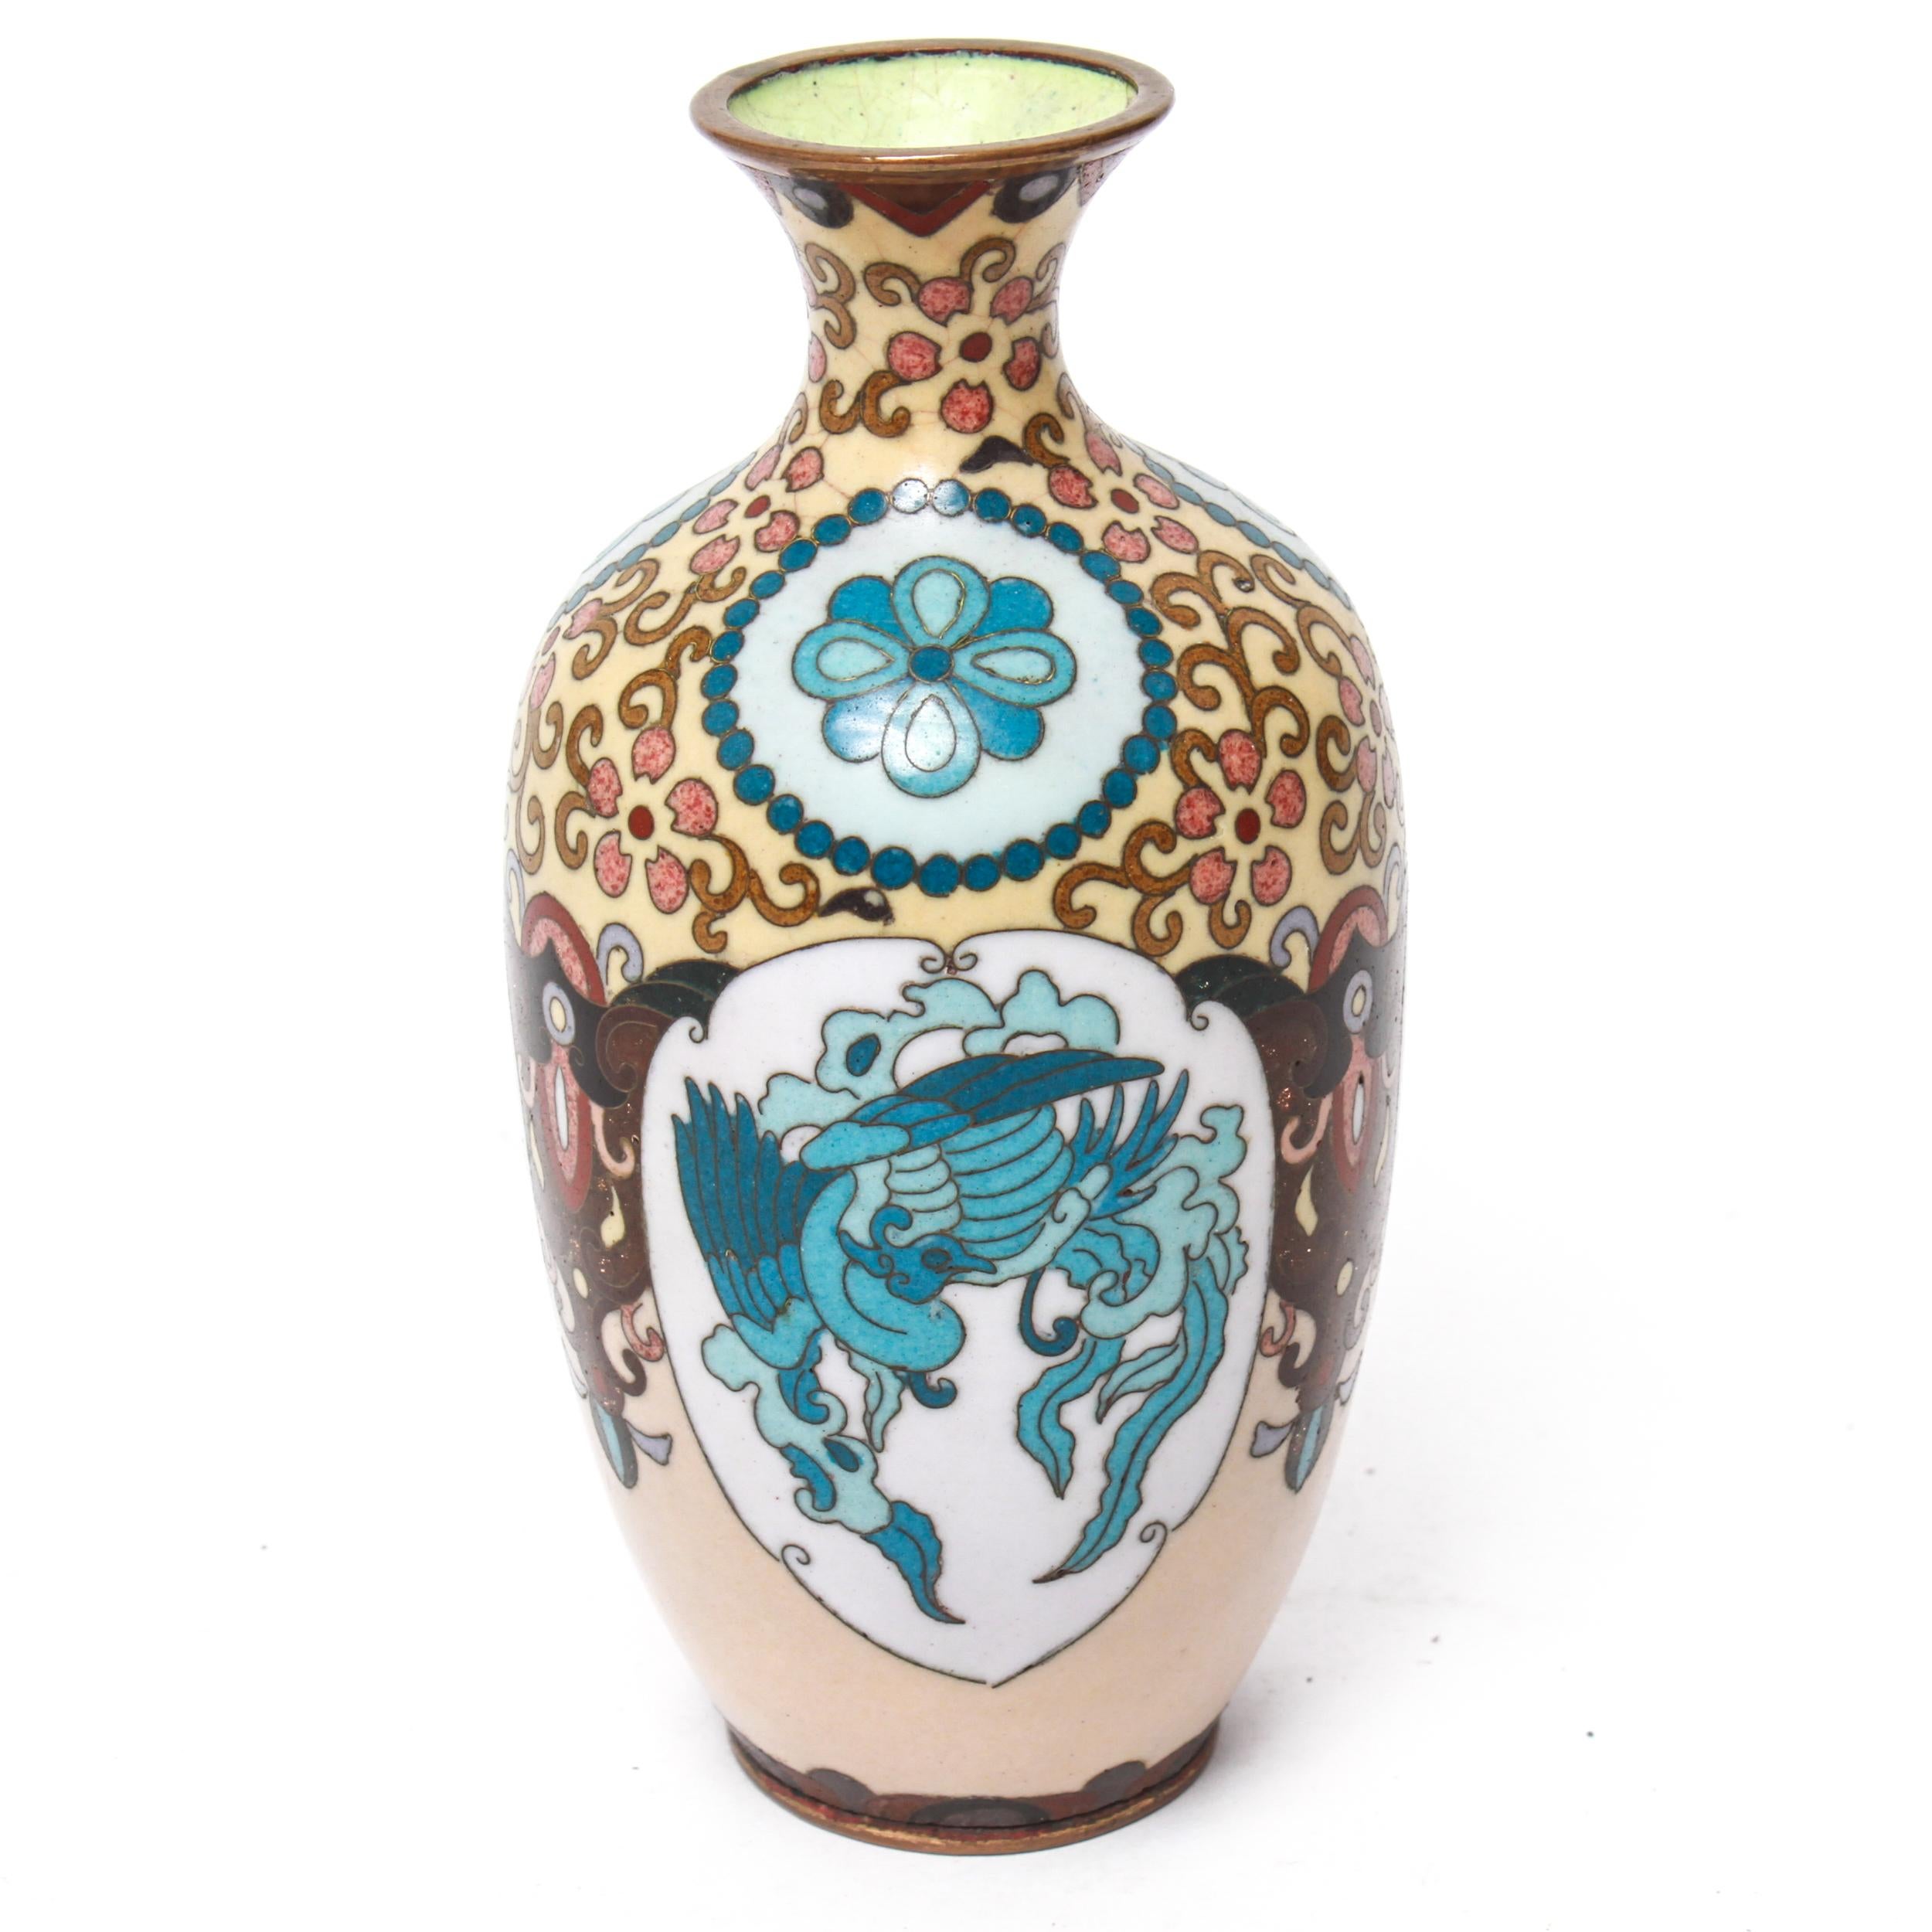 Japanese Meiji period cloisonne bud vase with floral, vine, and geometric patterns in enamel. The underside and interior of the vase have chartreuse glazing. The piece was made in the 19th century and is in great antique condition with